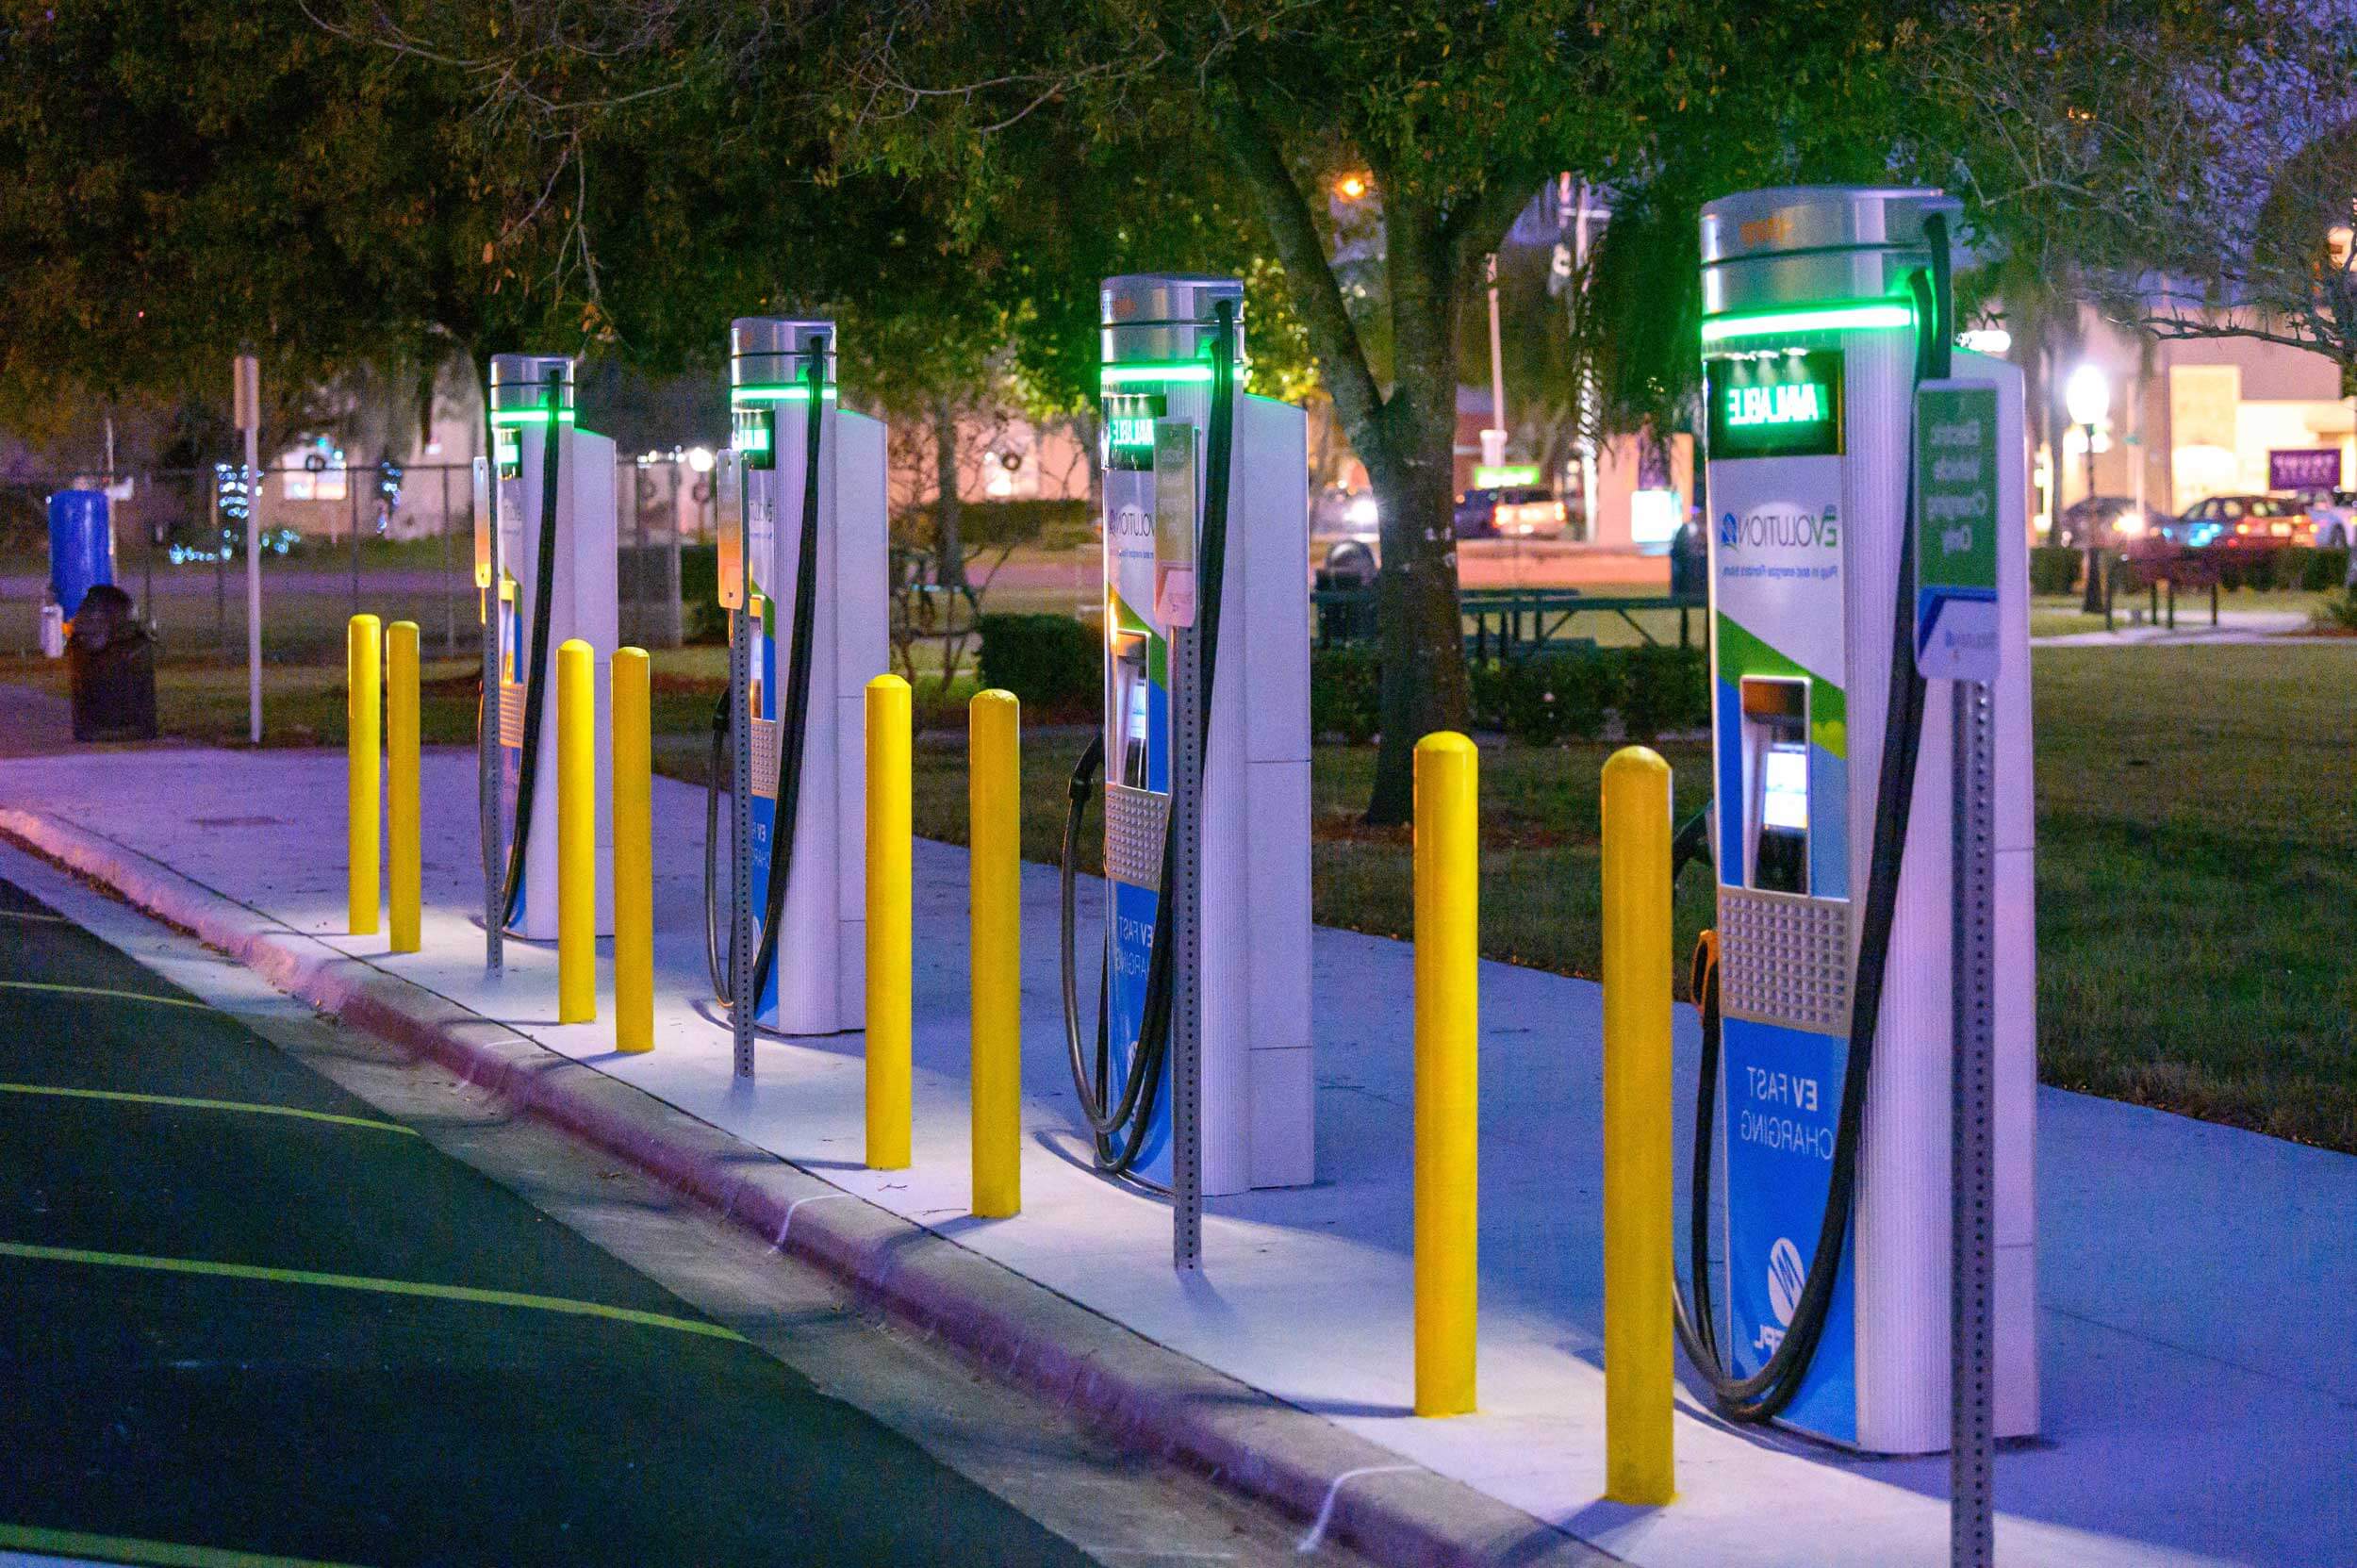 A row of electric vehicle charging stations